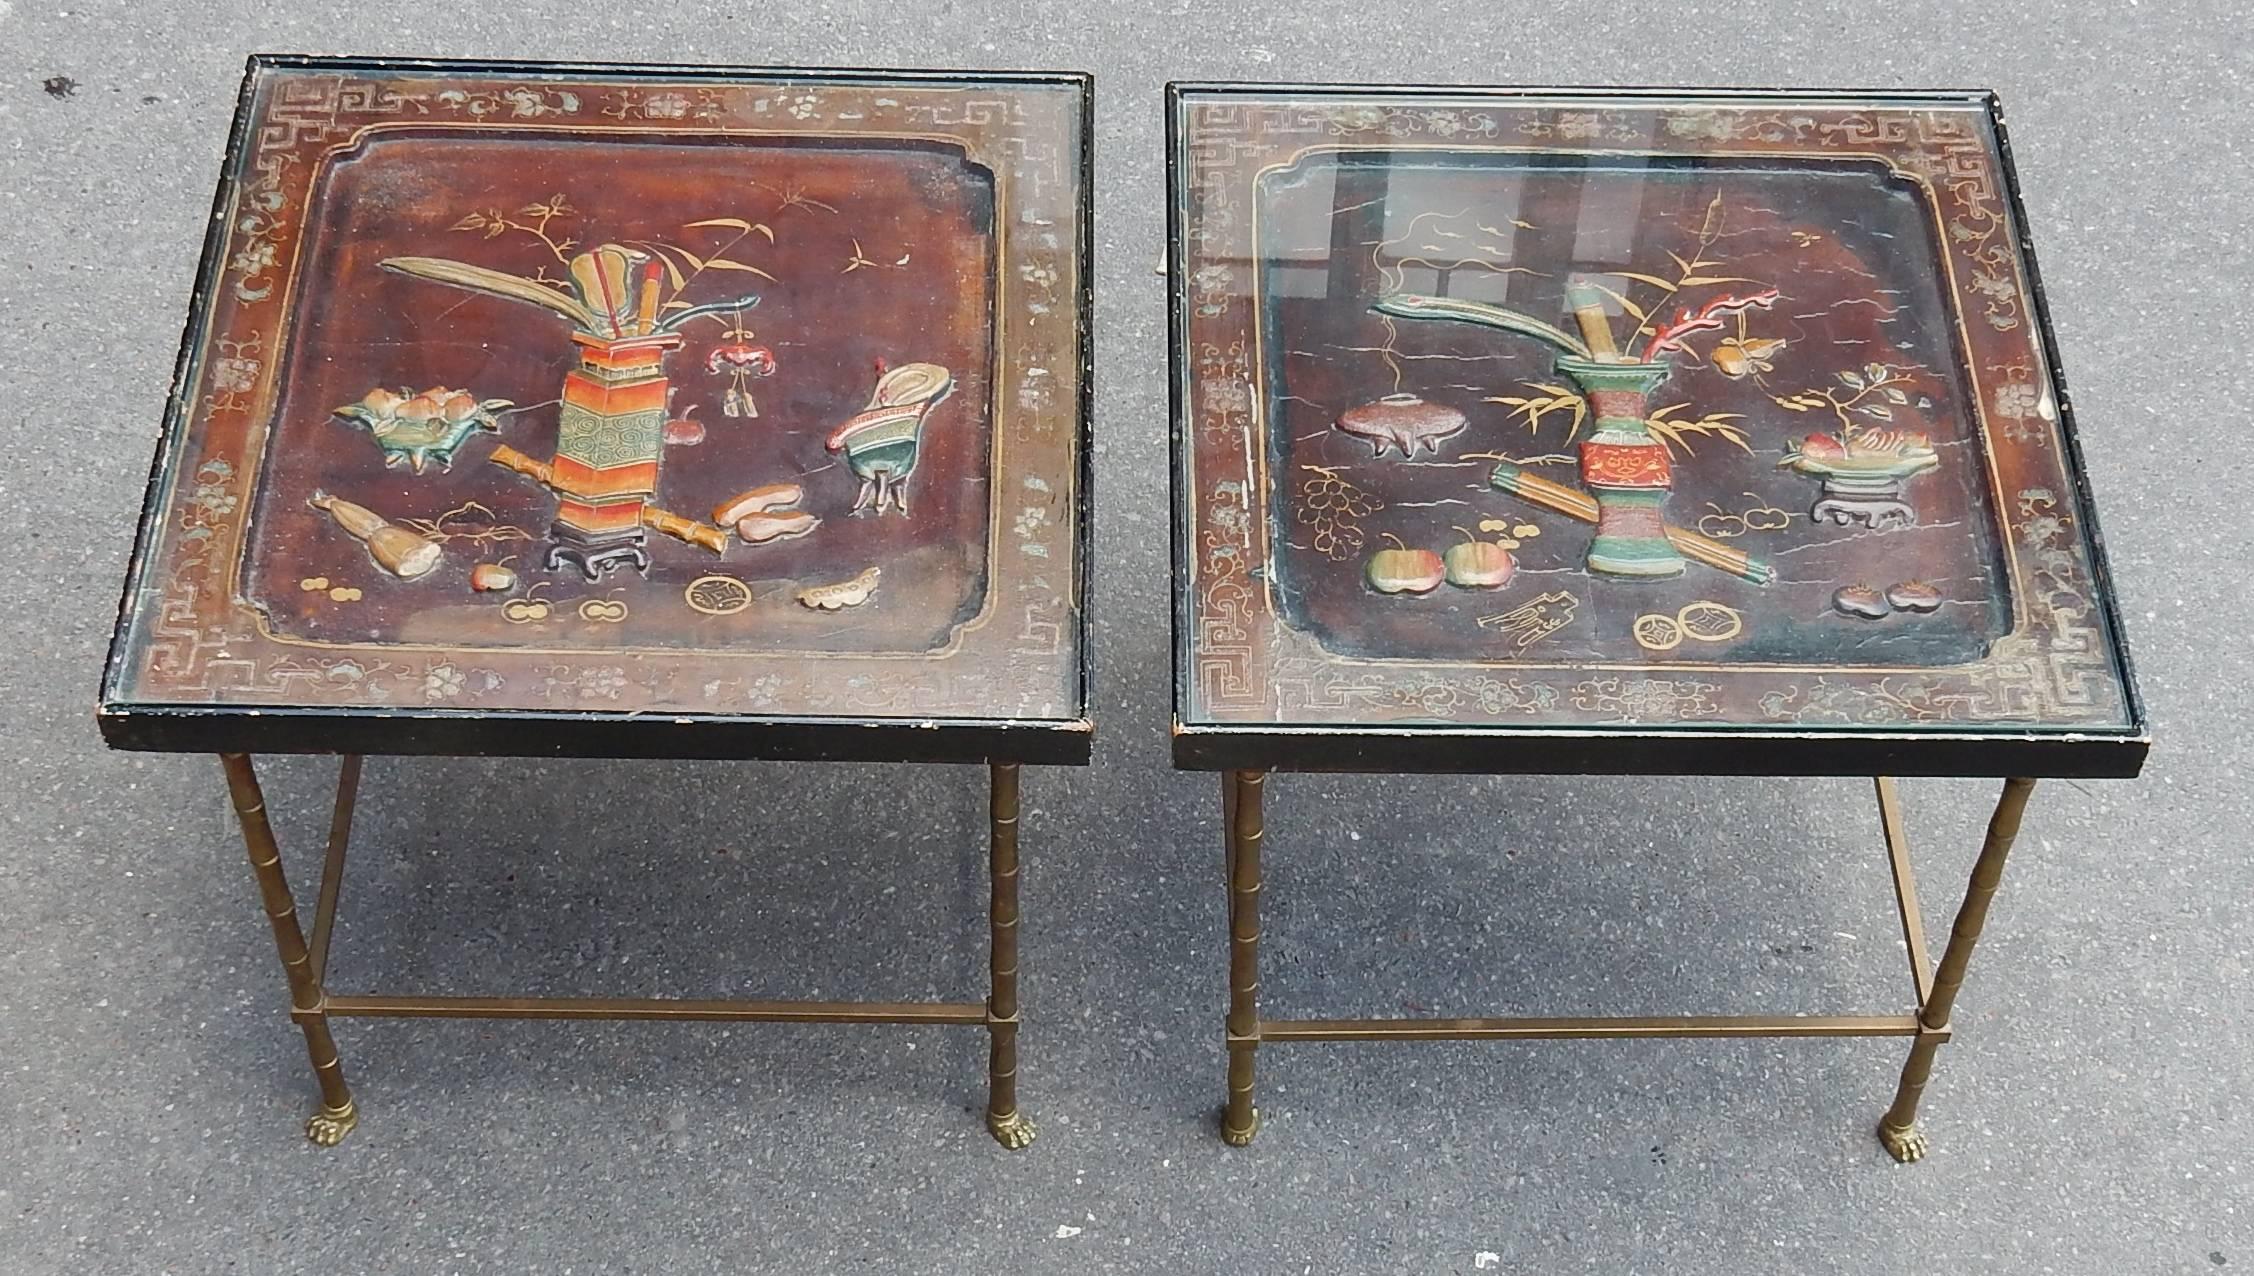 Pair of end of sofa bronze with amounts bamboo deco ending by feet same lion feet. Top is fruits and urn in lacquer of china and glass, circa 1950-1970.